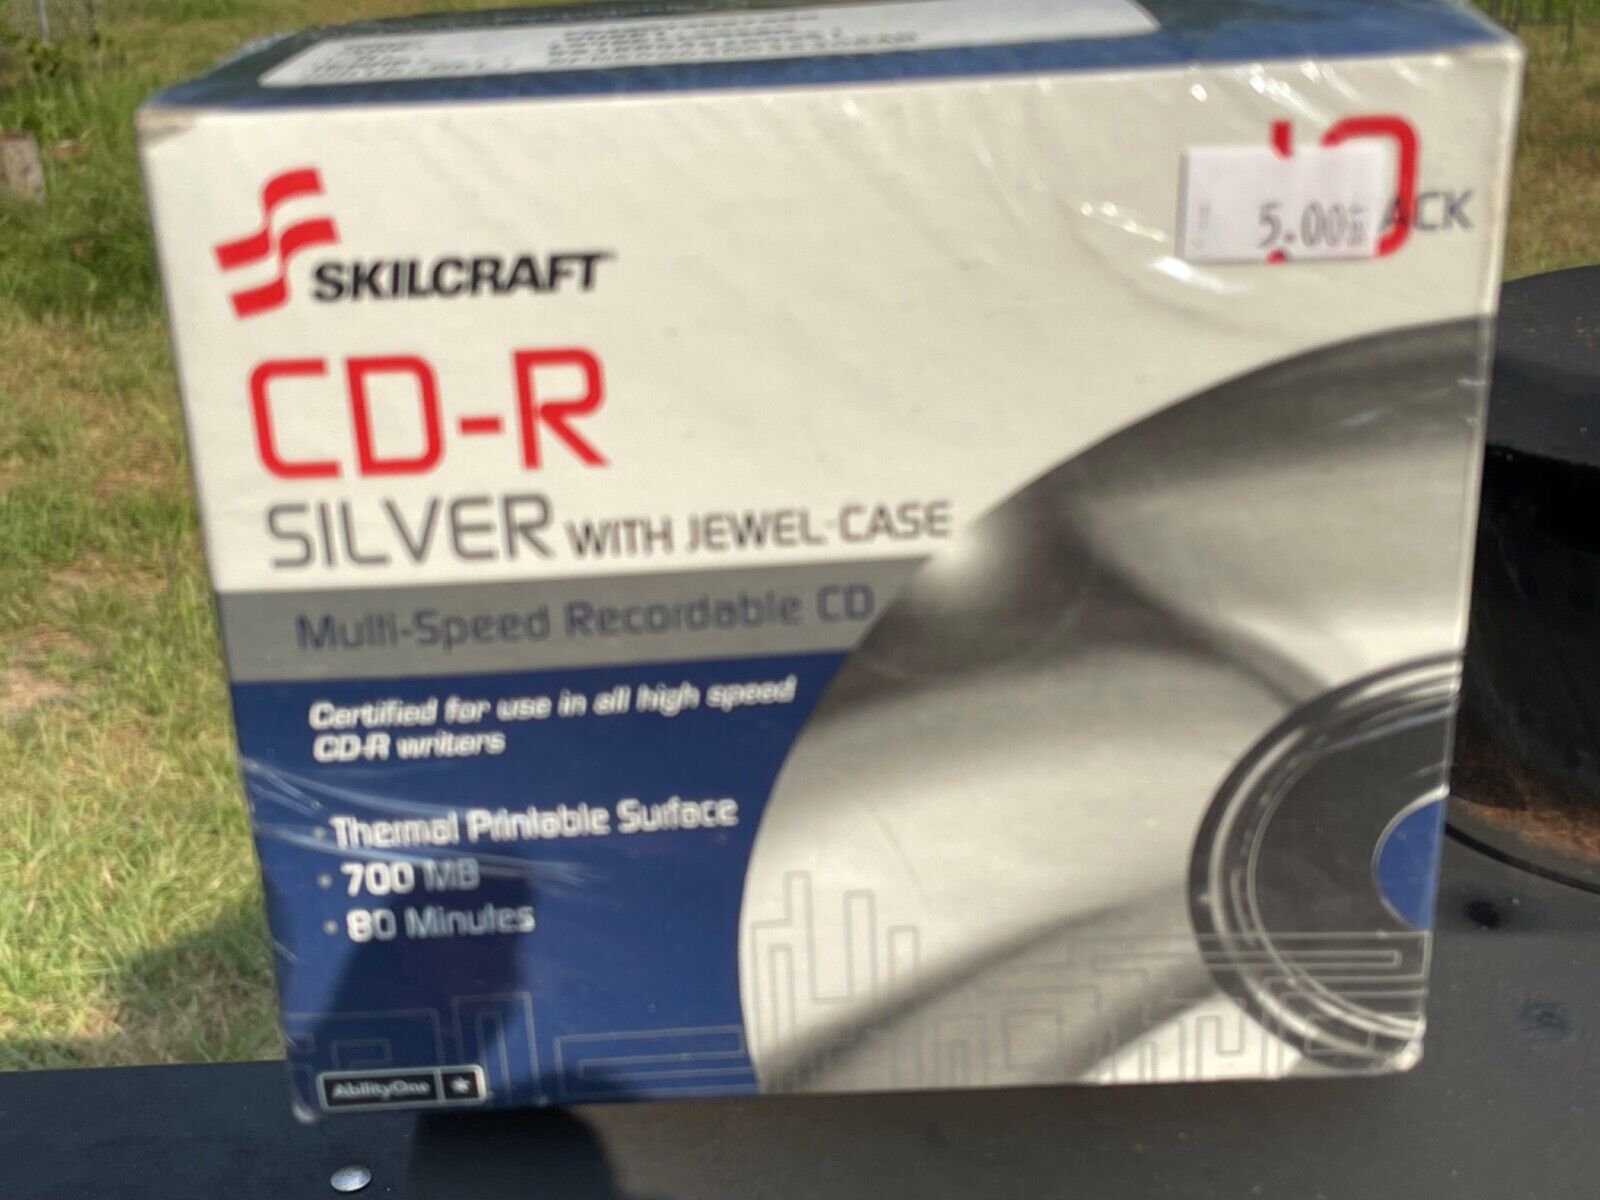 New CD-R Silver W/Jewel Case Multi Speed Recordable CD 10 Pack 700MB Skilcraft